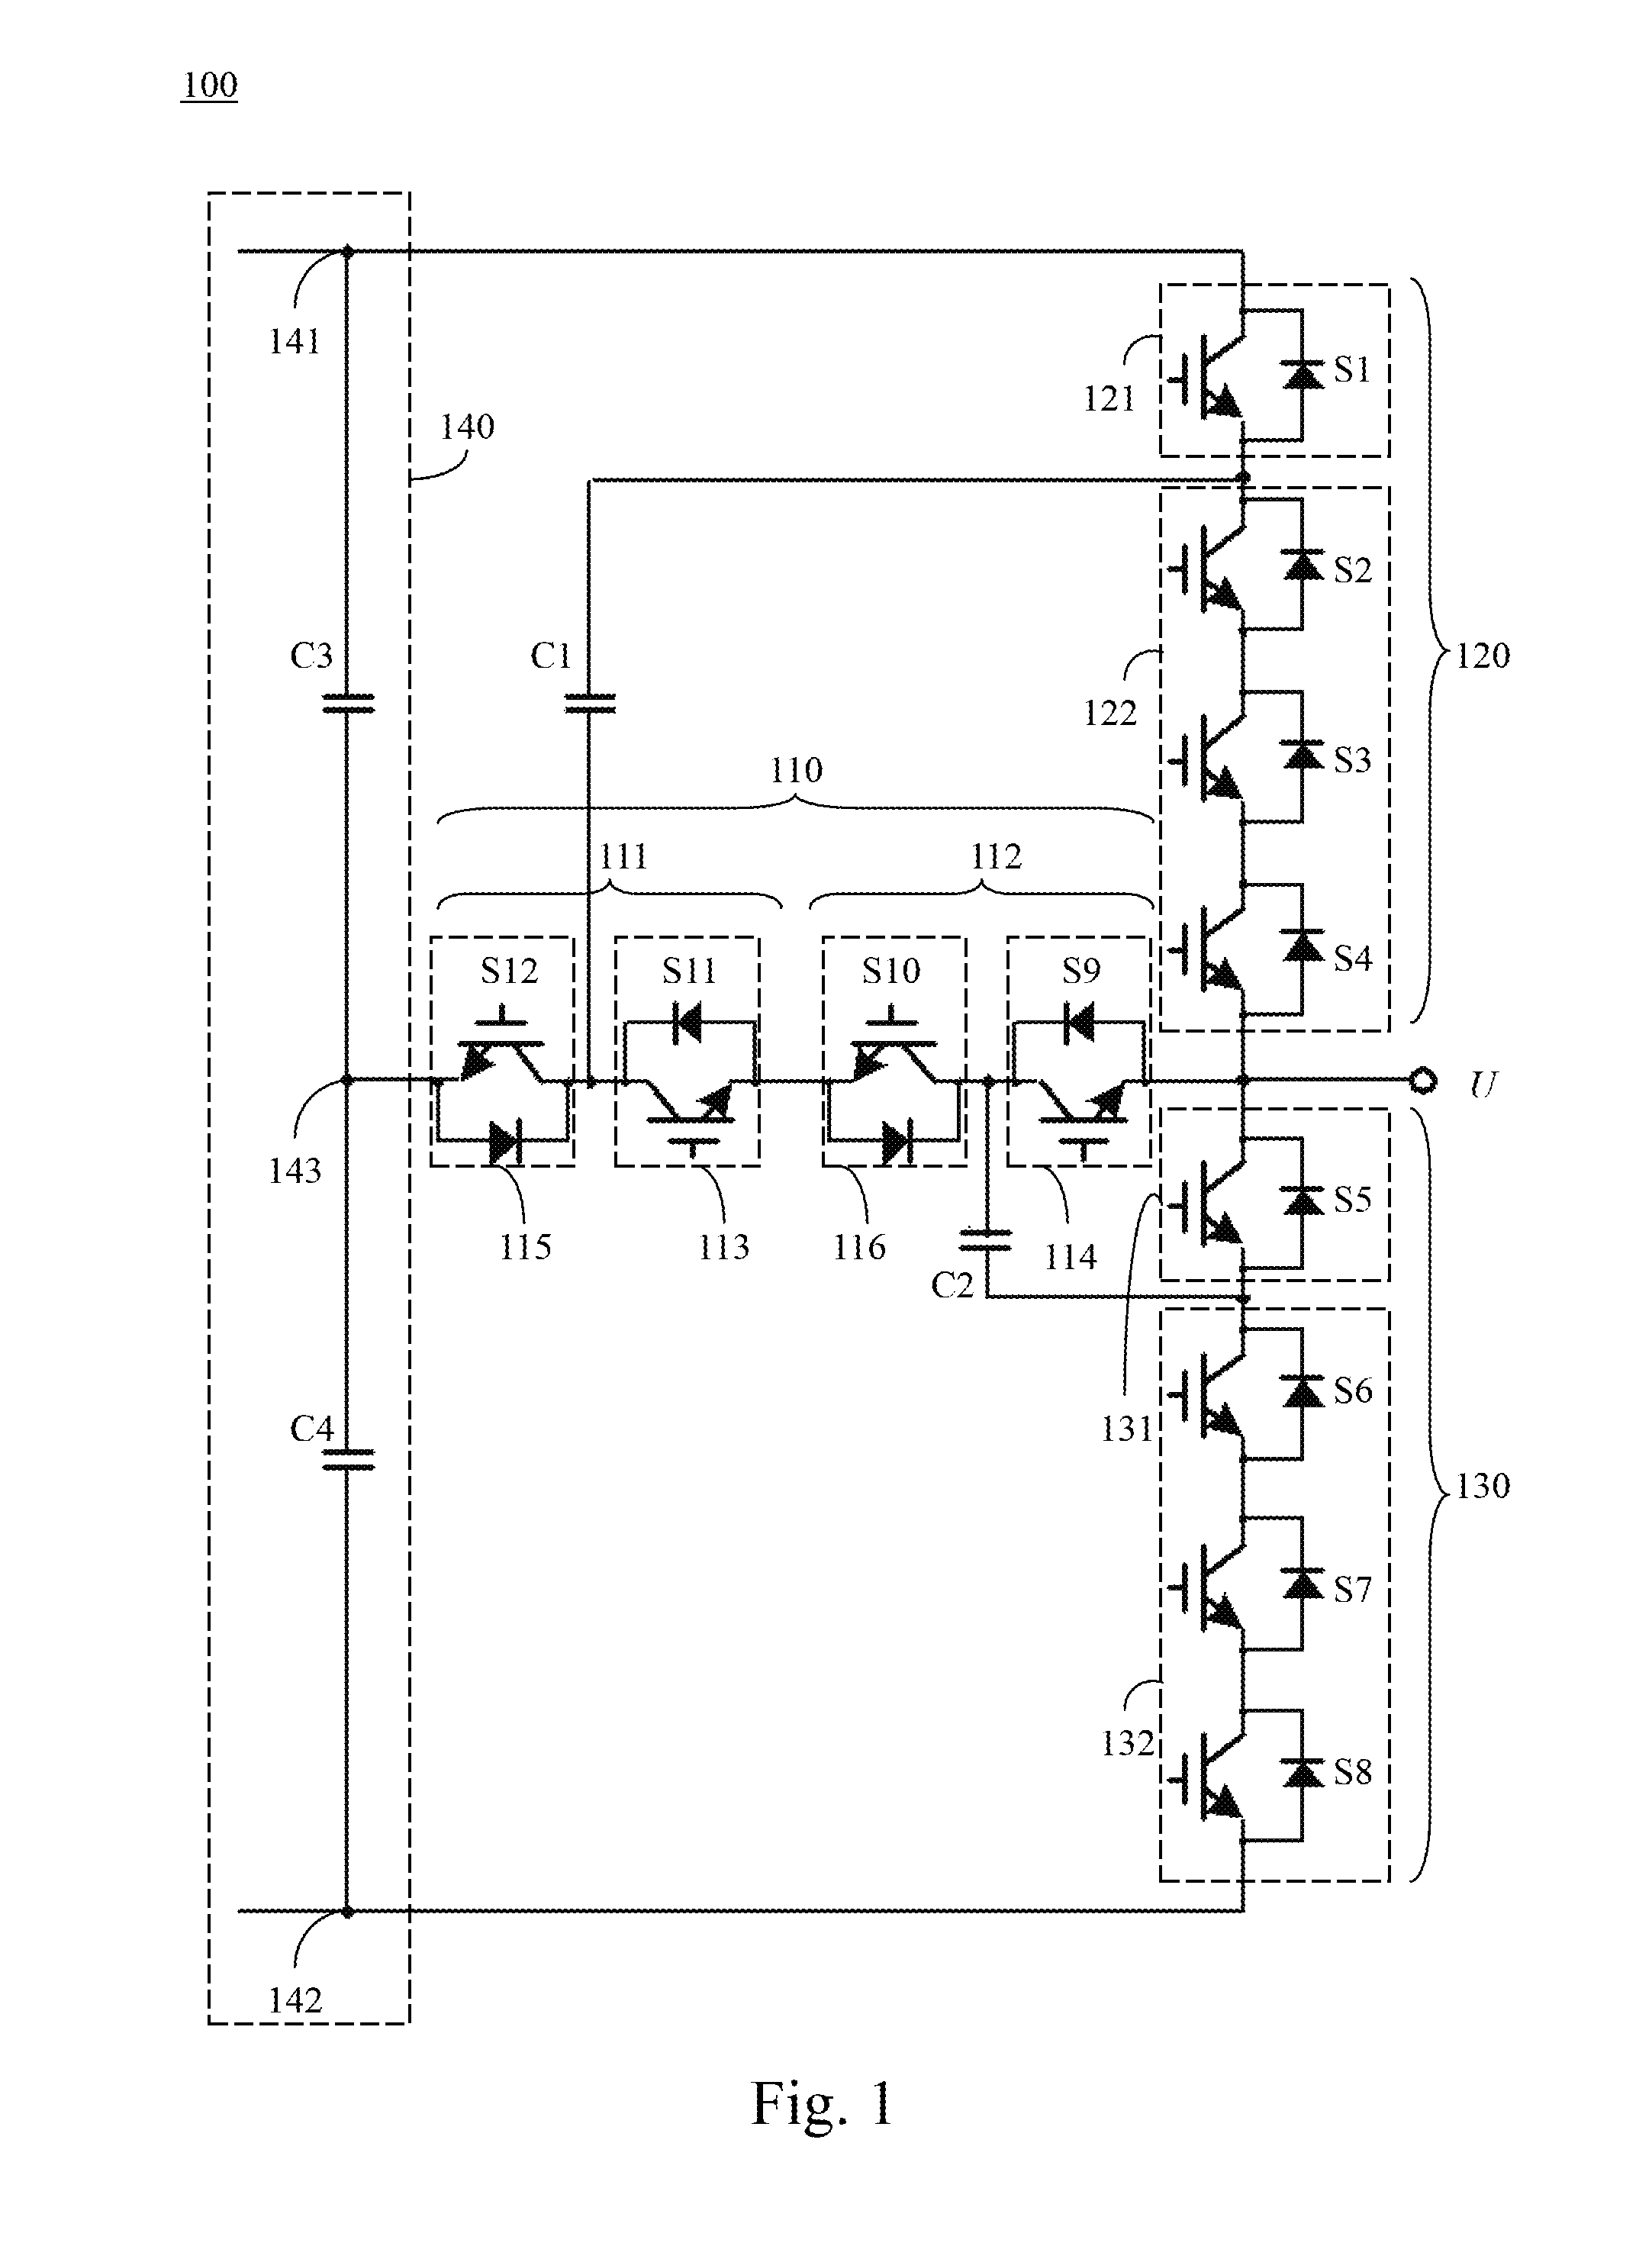 Five-level converting device